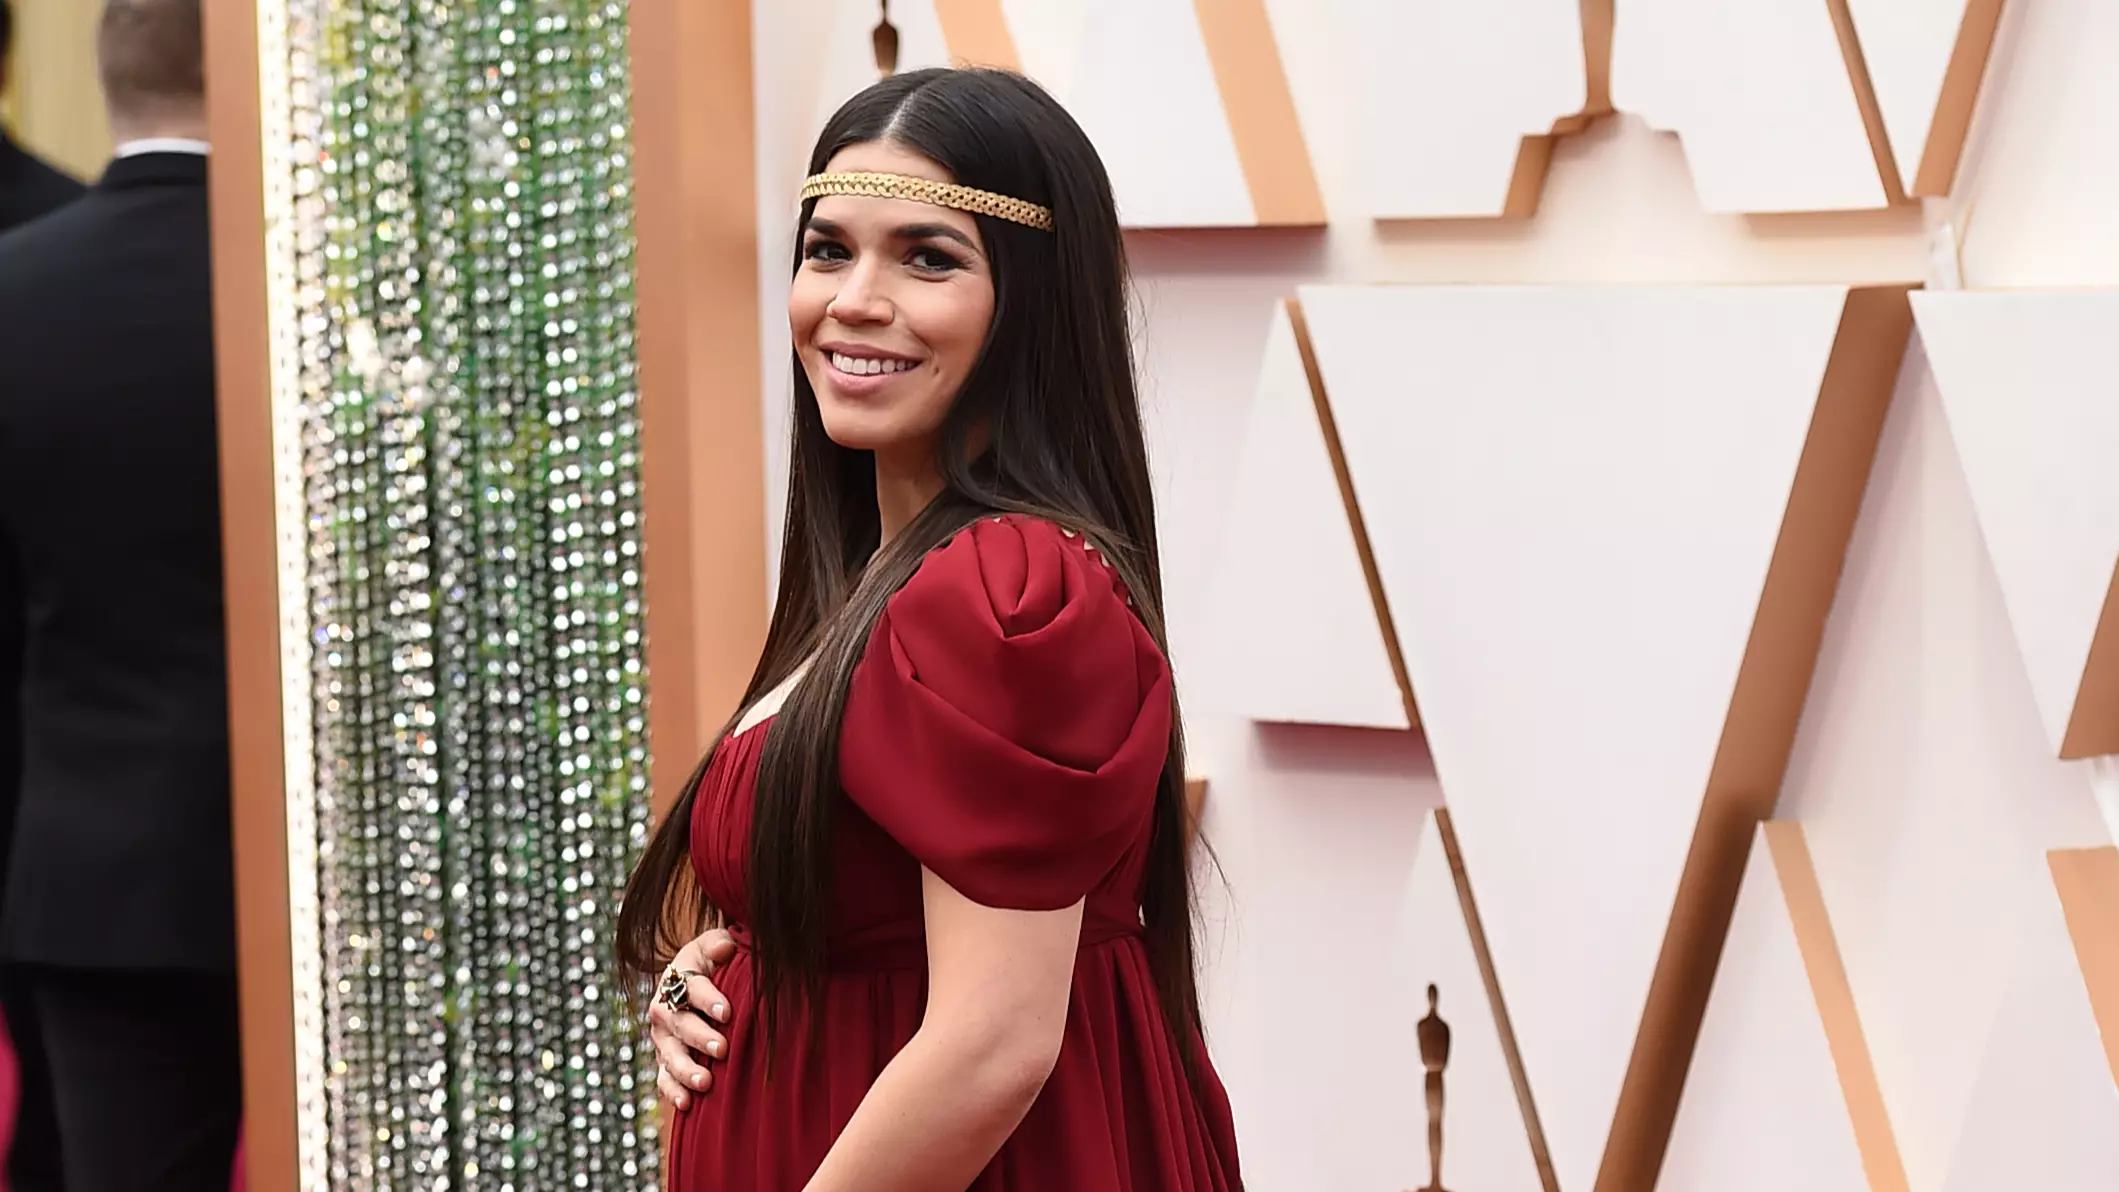 America Ferrera Explains Heartfelt Meaning Behind Her Oscars Outfit